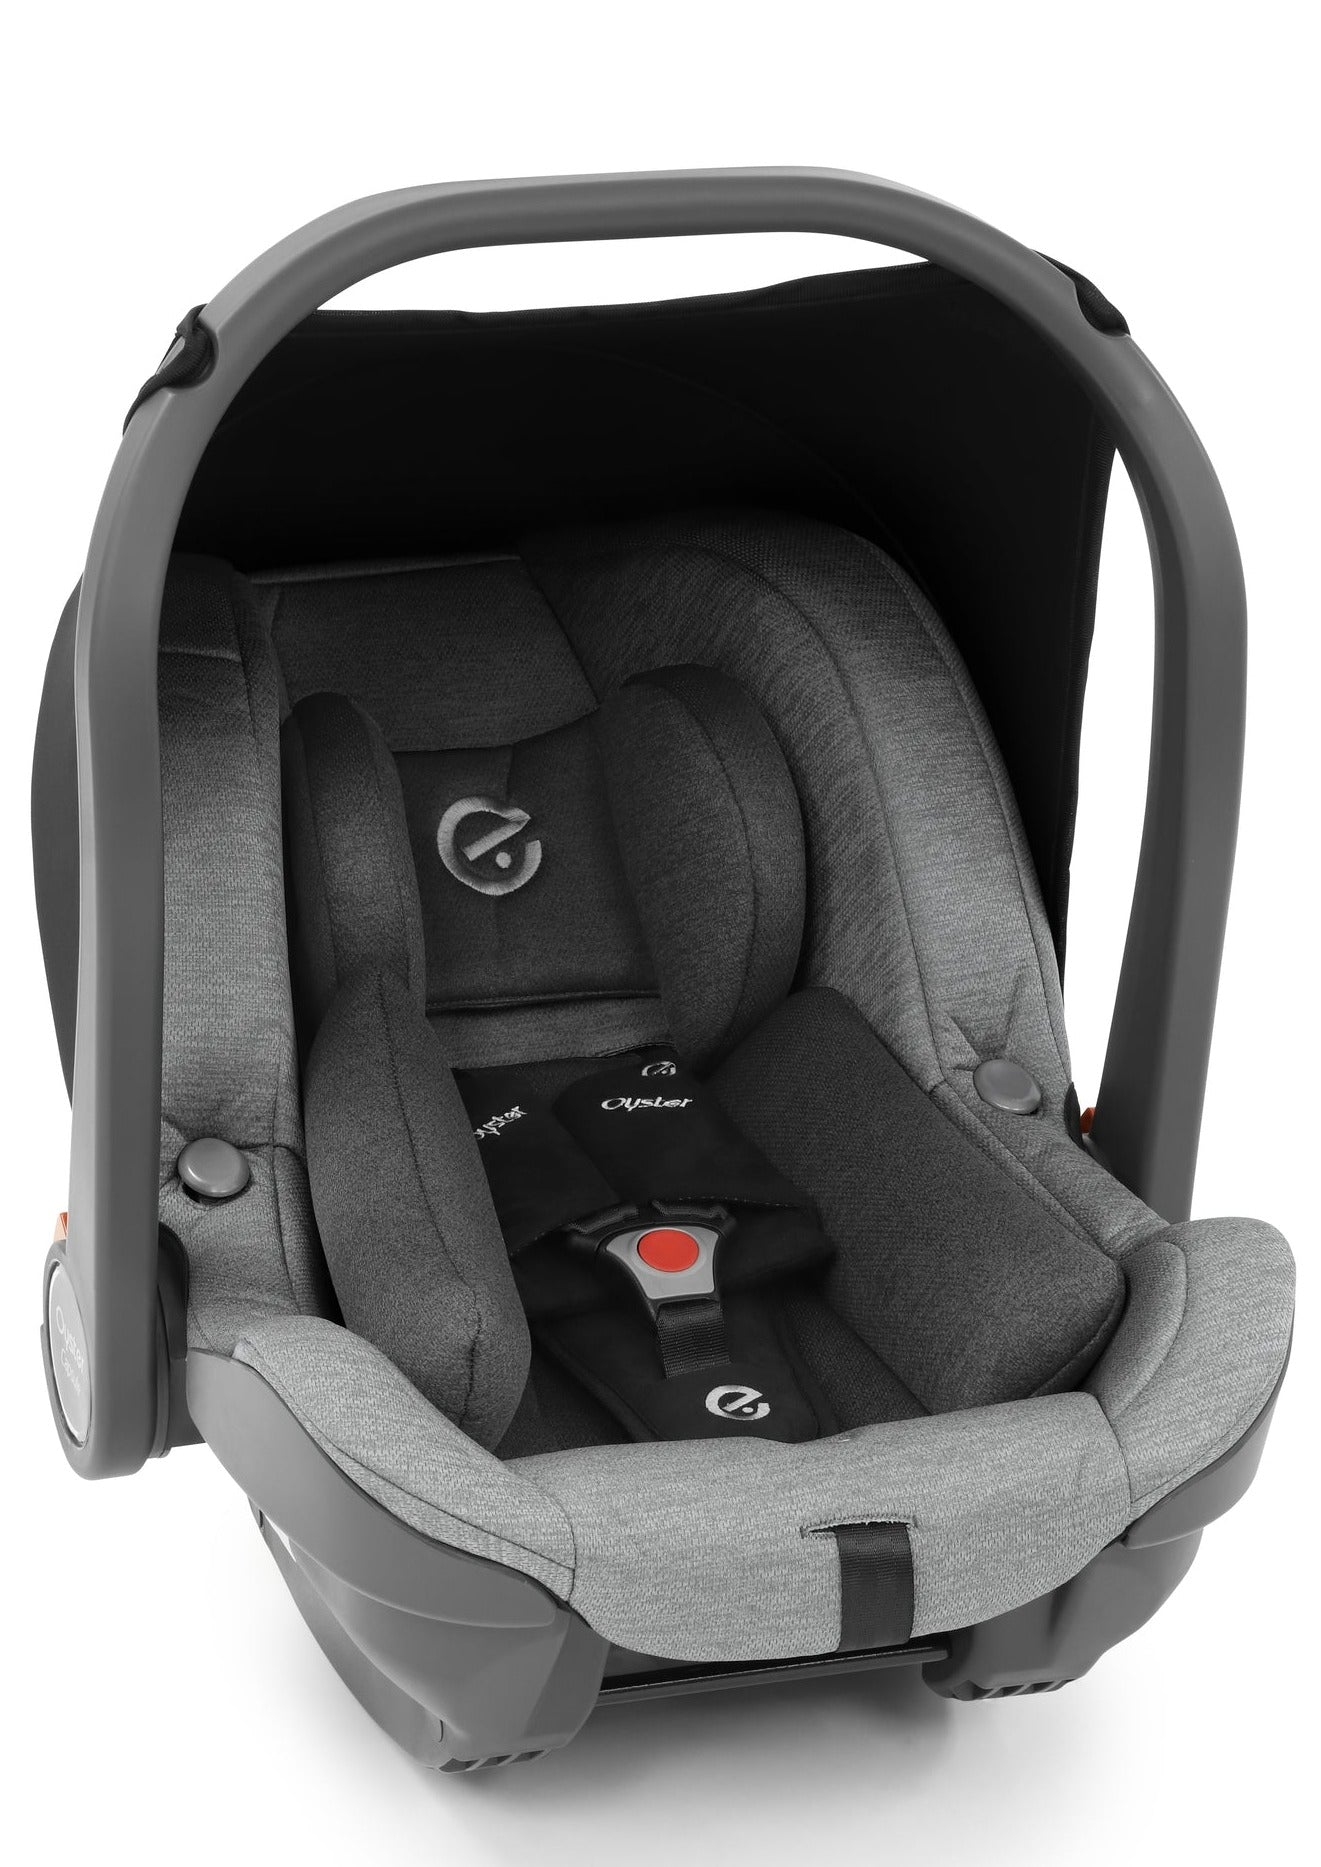 Oyster 3 Moon Travel System